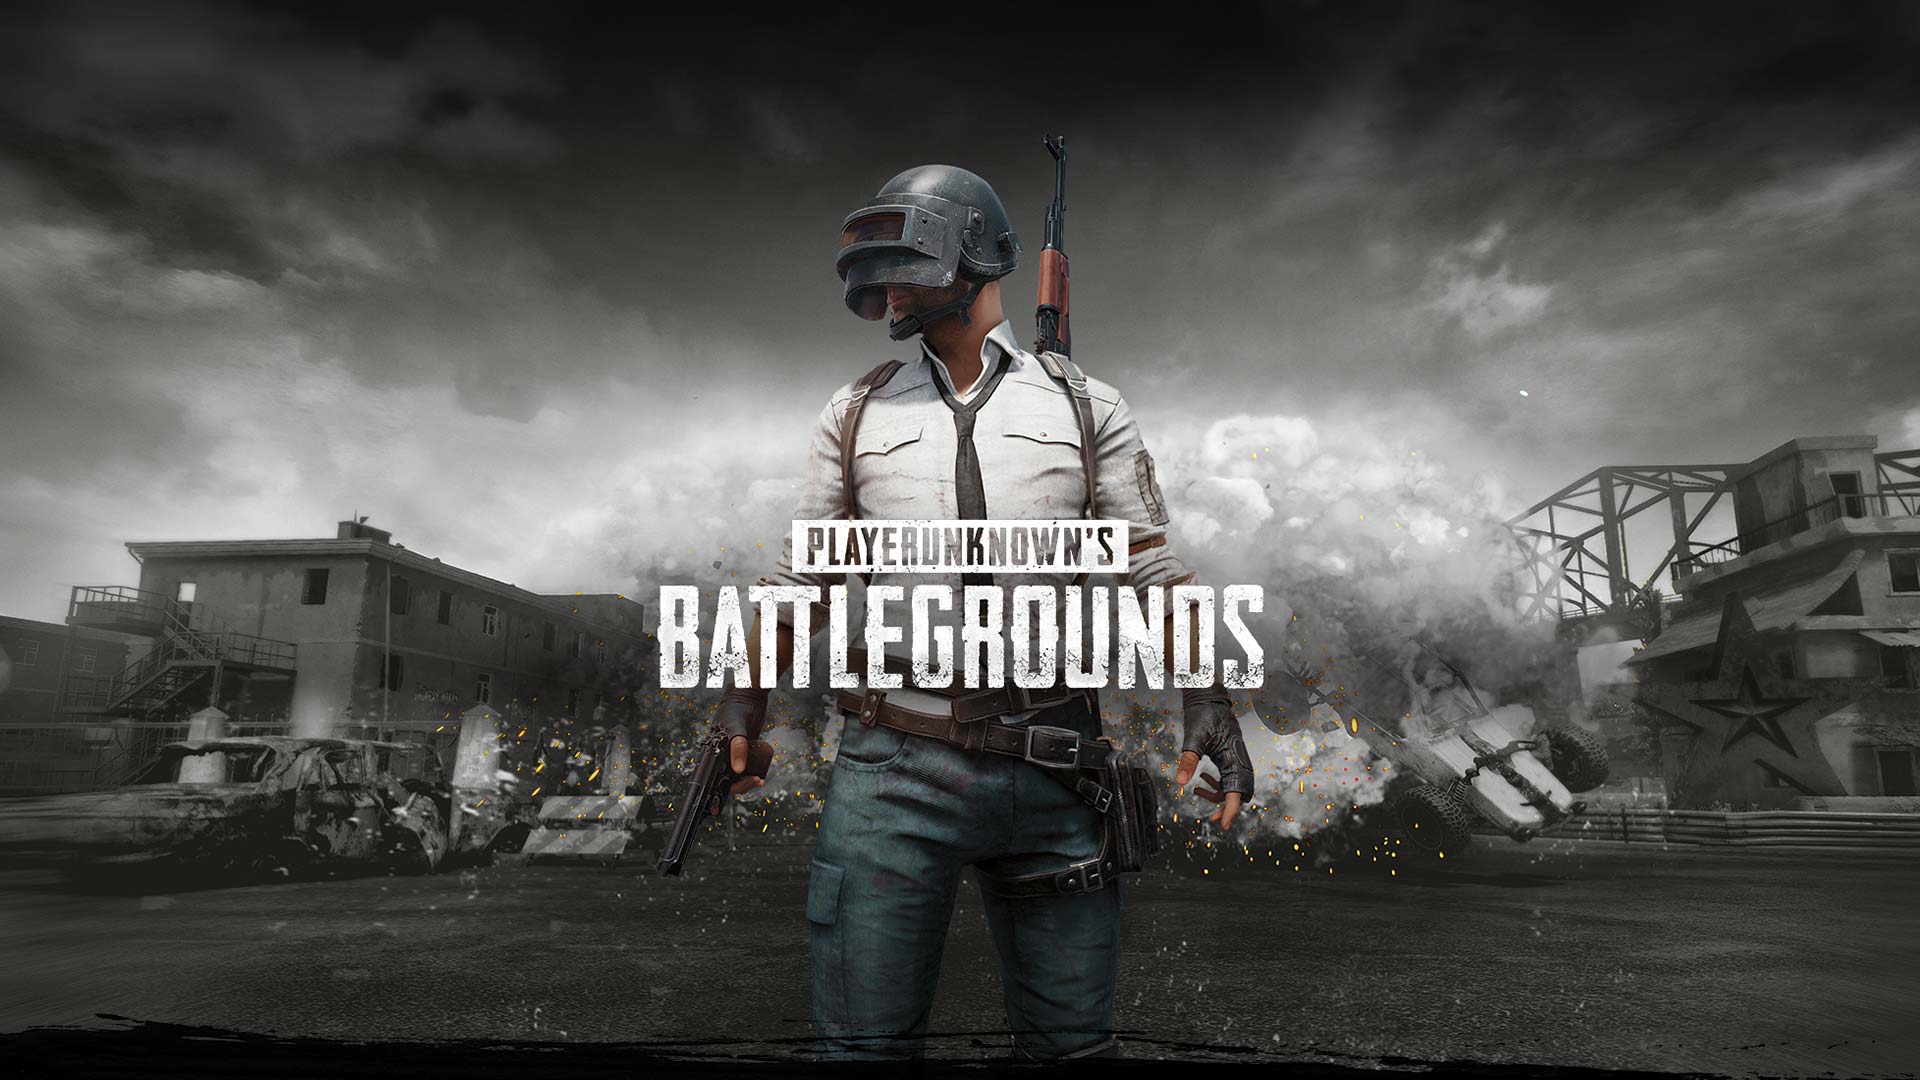 PLAYERUNKNOWN'S BATTLEGROUNDS for Xbox One